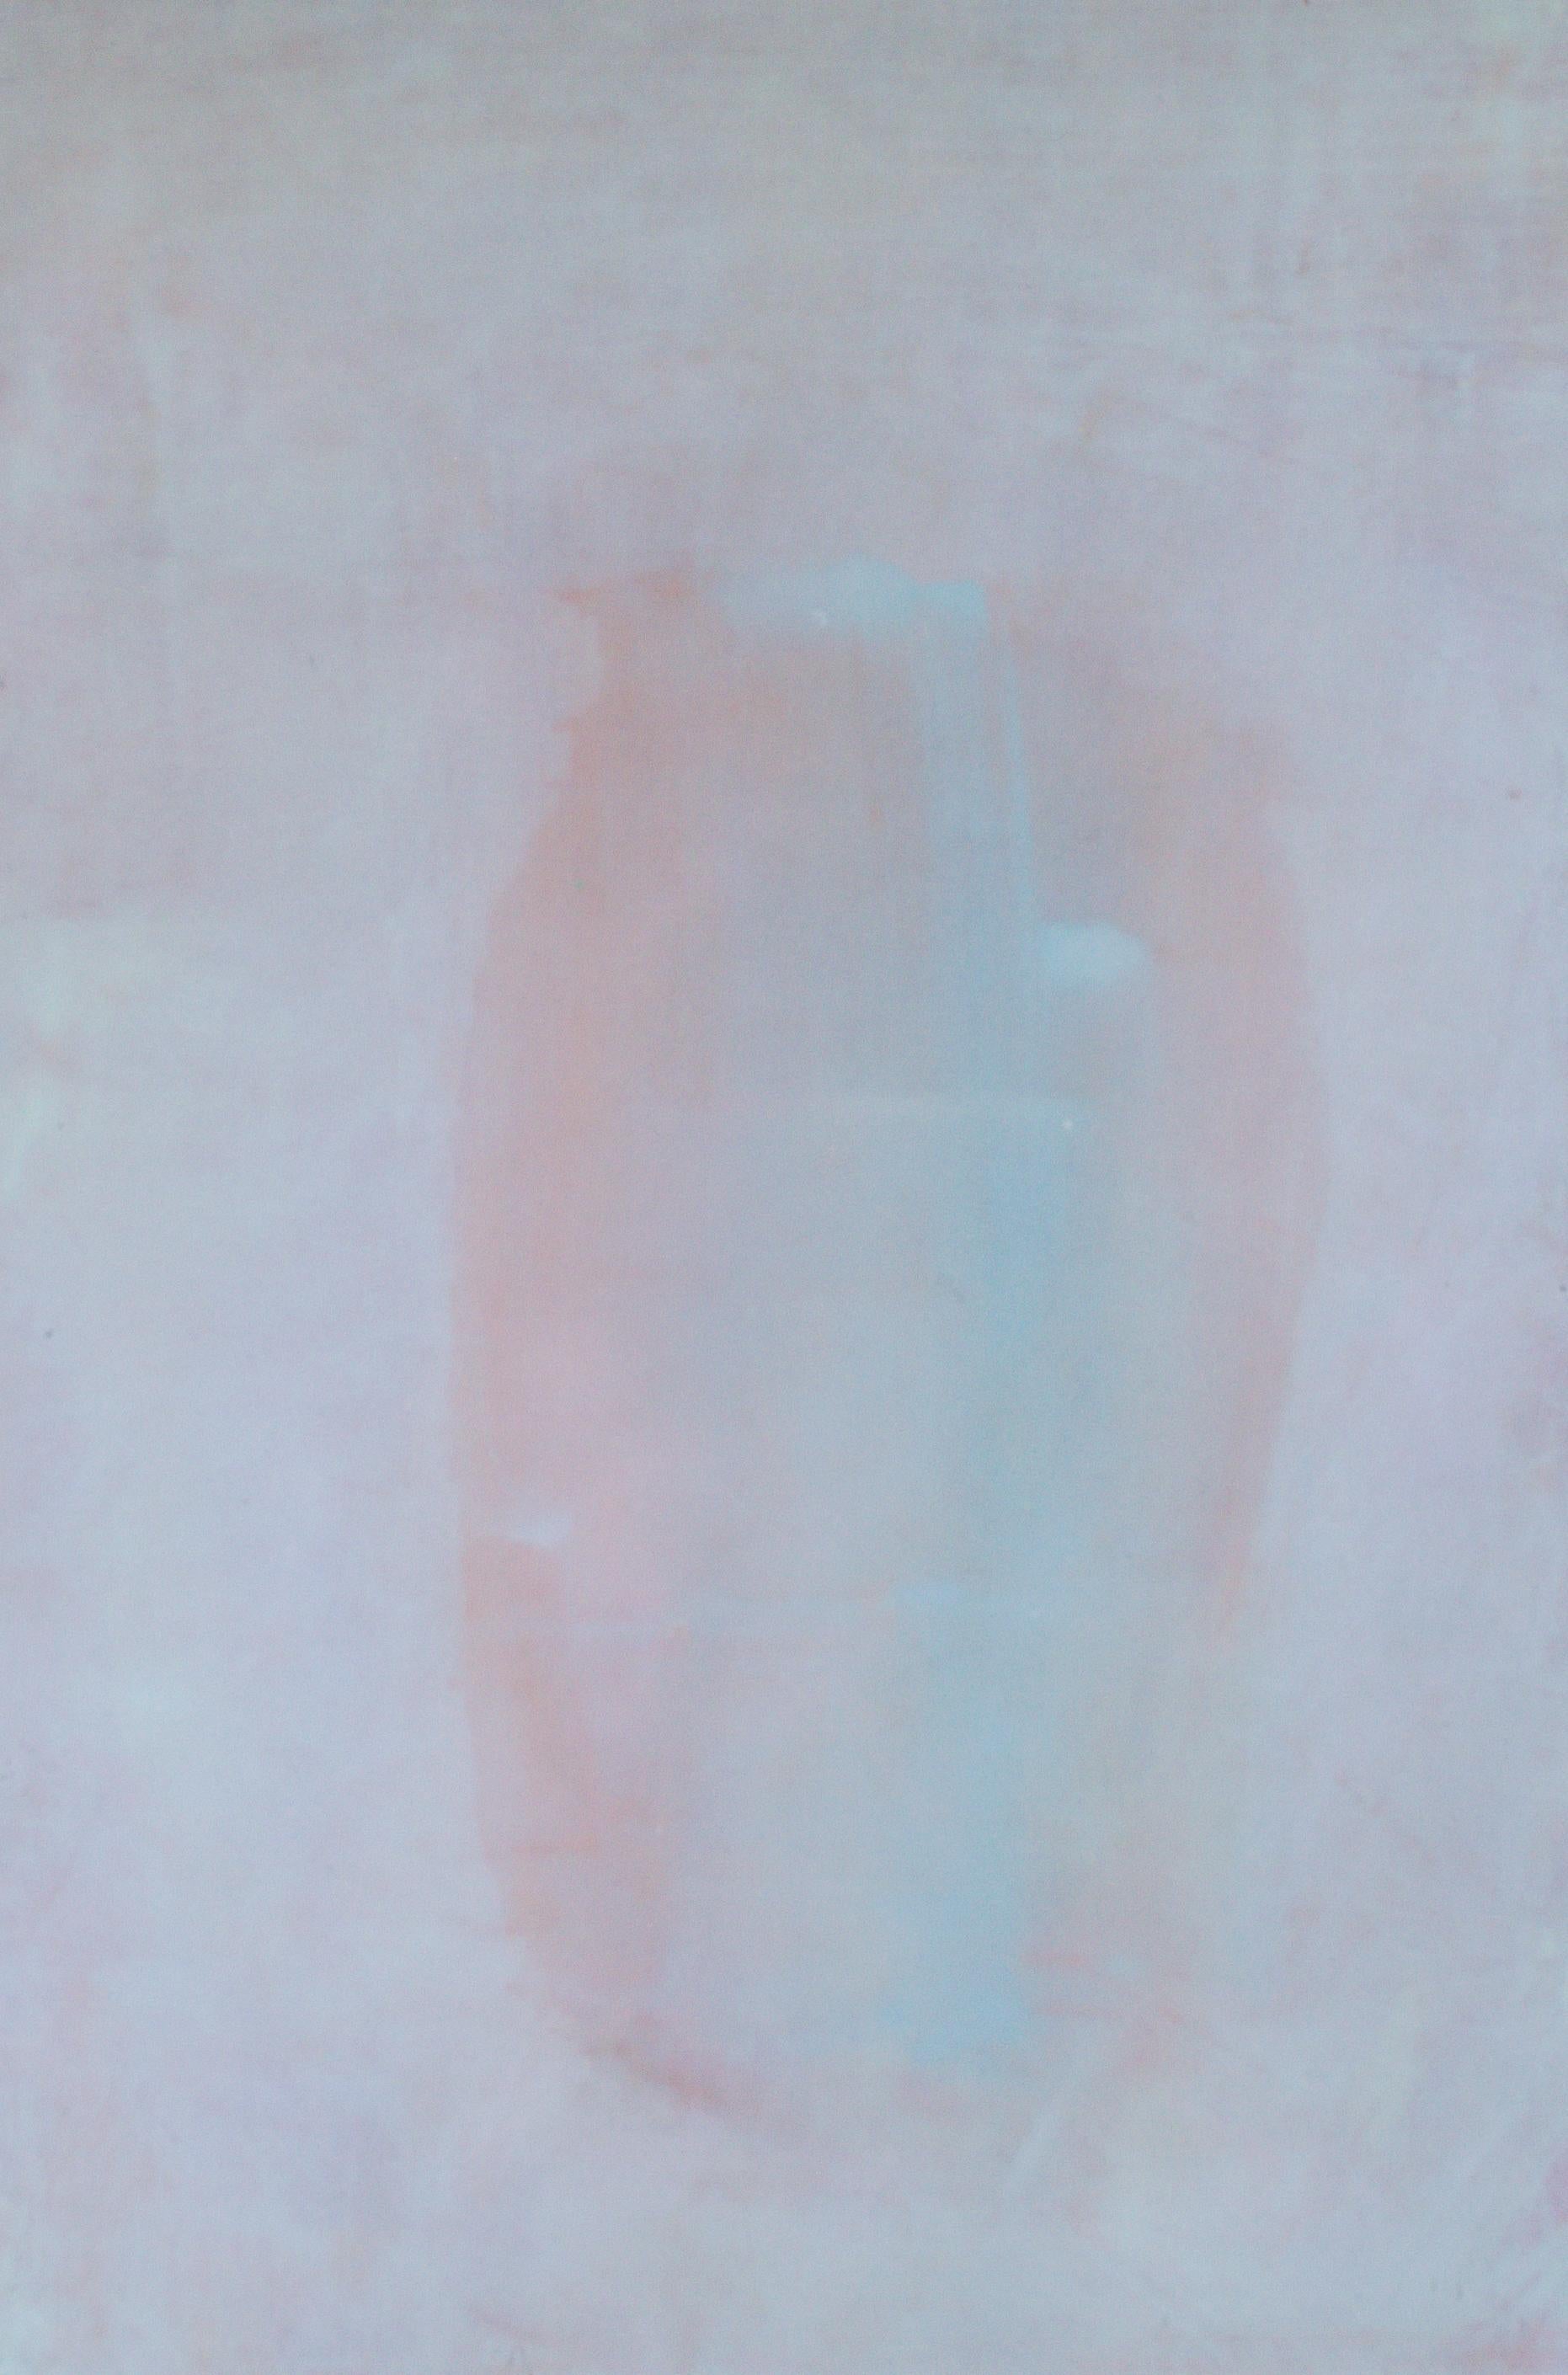 SHERRON FRANCIS (AMERICAN, B. 1940)
Coosa, 1972
Acrylic on canvas
65 1/2 x 44 1/2 inches
Signed, titled and dated on the reverse

A reappraisal is long overdue for the second-generation abstract expressionists. Artists such as Helen Frankenthaler,